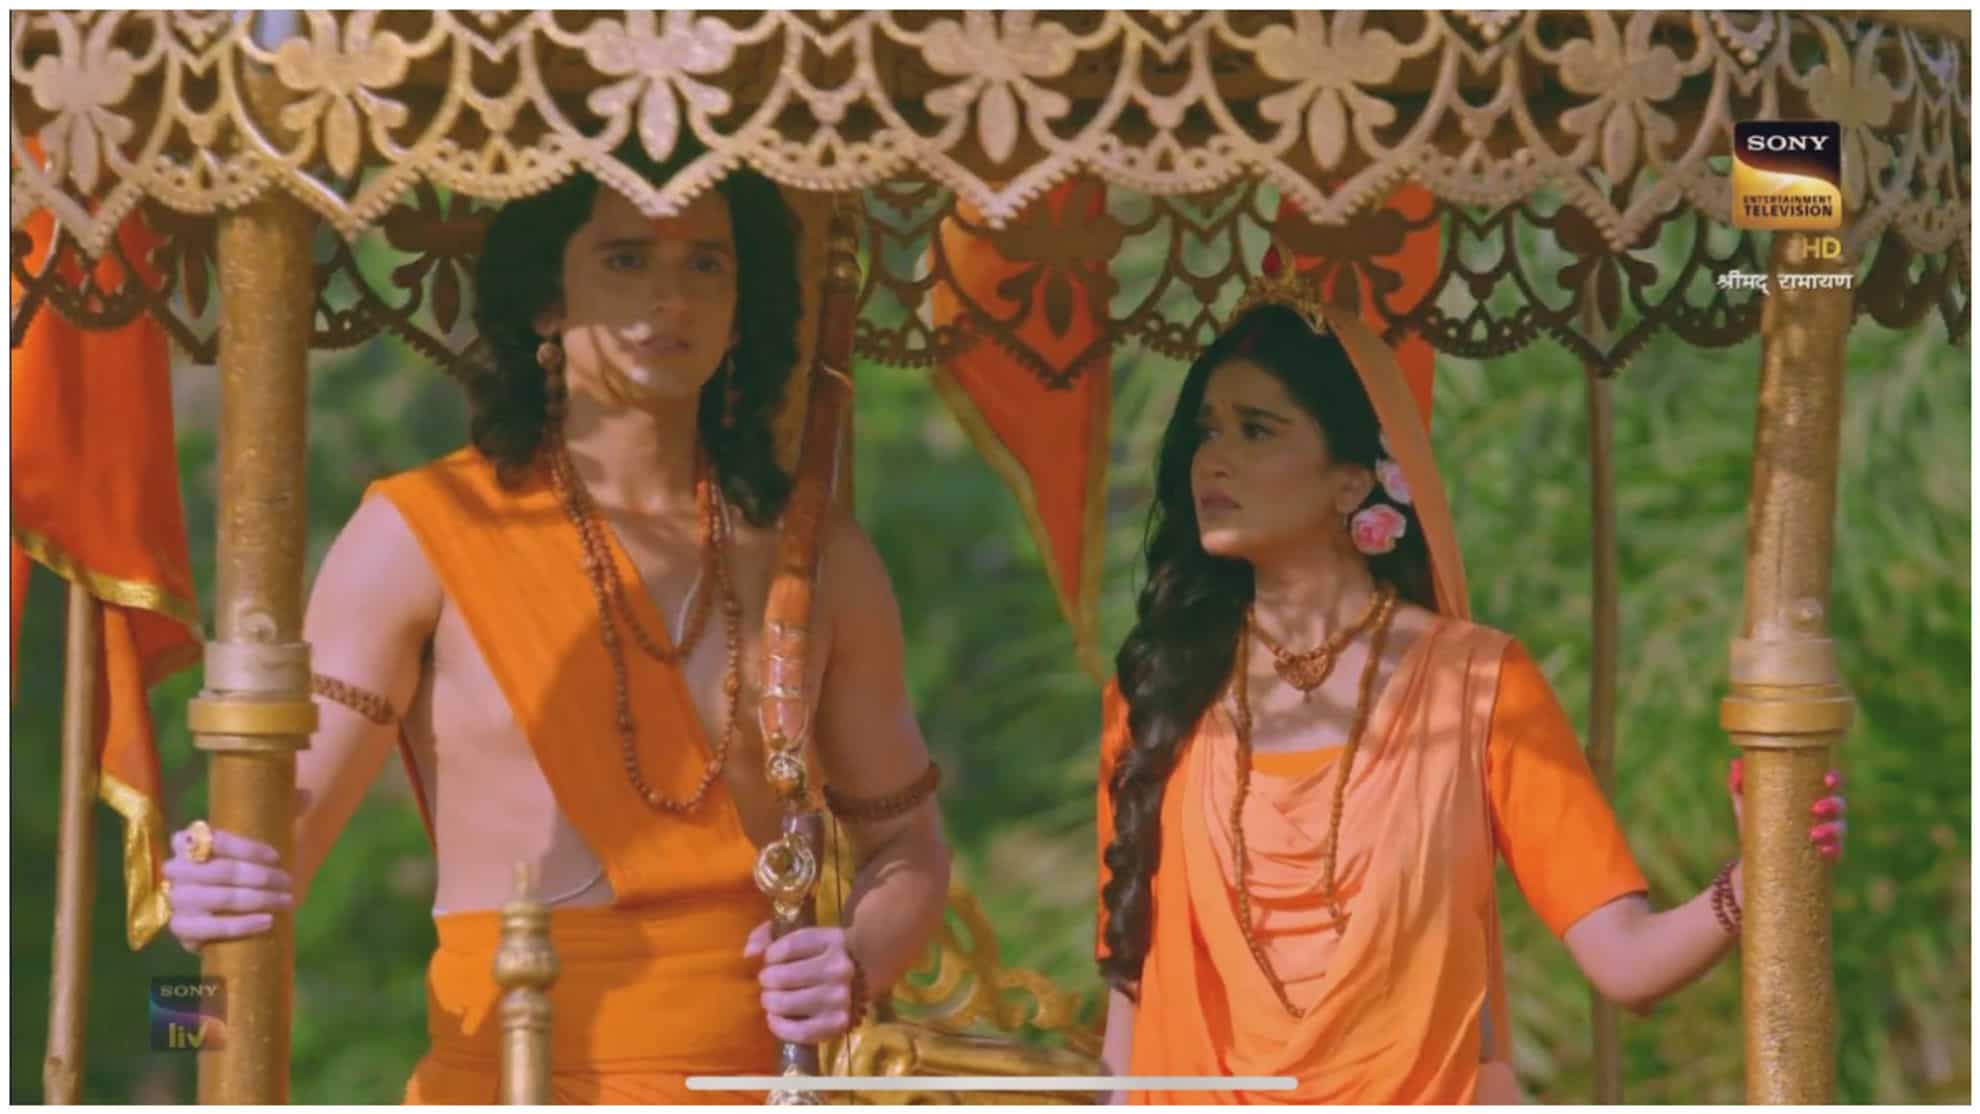 https://www.mobilemasala.com/film-gossip/Shrimad-Ramayan-aired-12-mins-later-than-the-scheduled-time-on-TV-Twitter-users-feel-furious-i215366